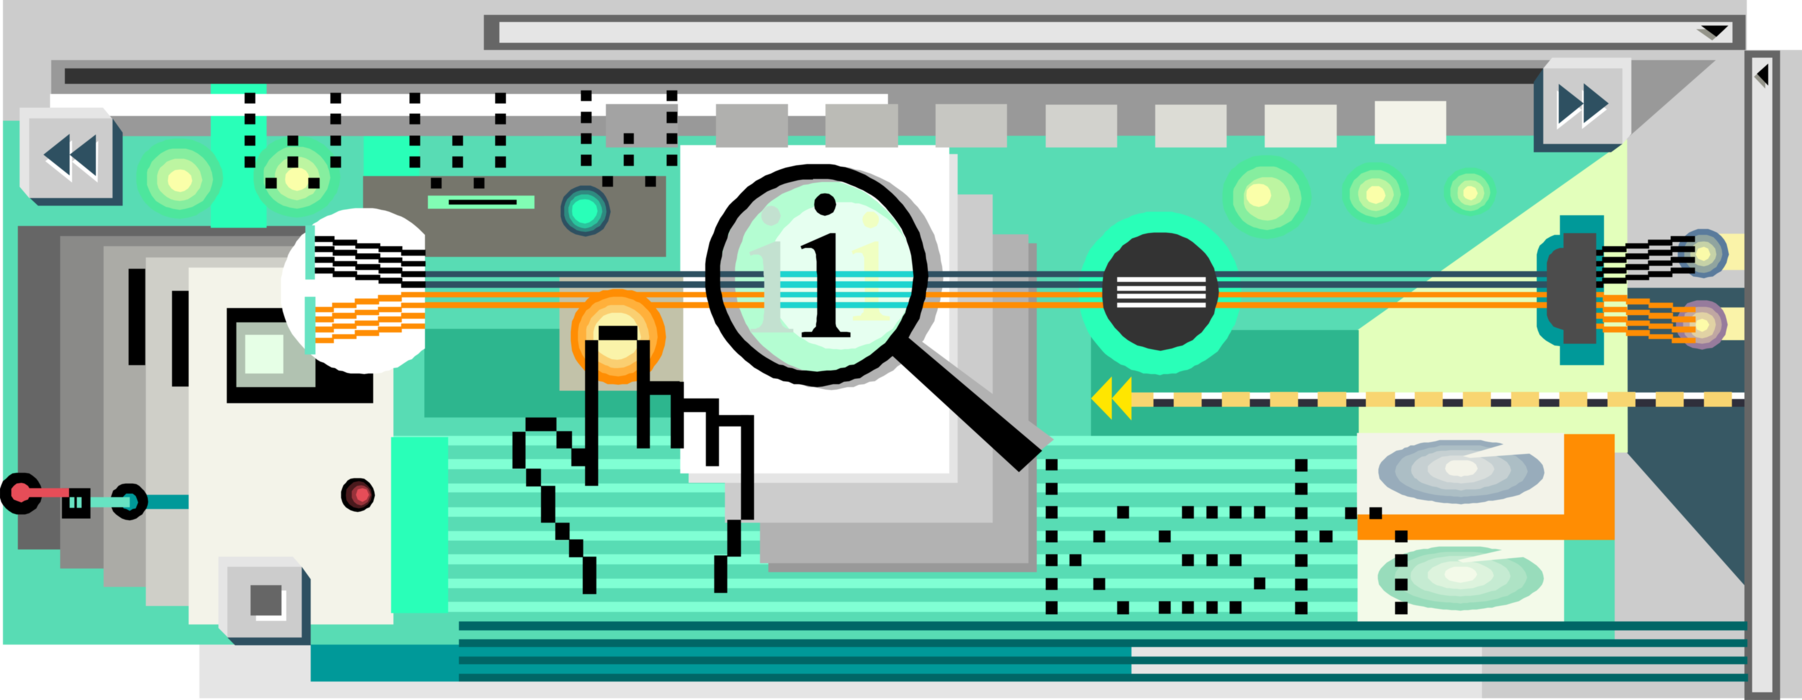 Vector Illustration of Scanning and Transmitting Information in the Digital Age